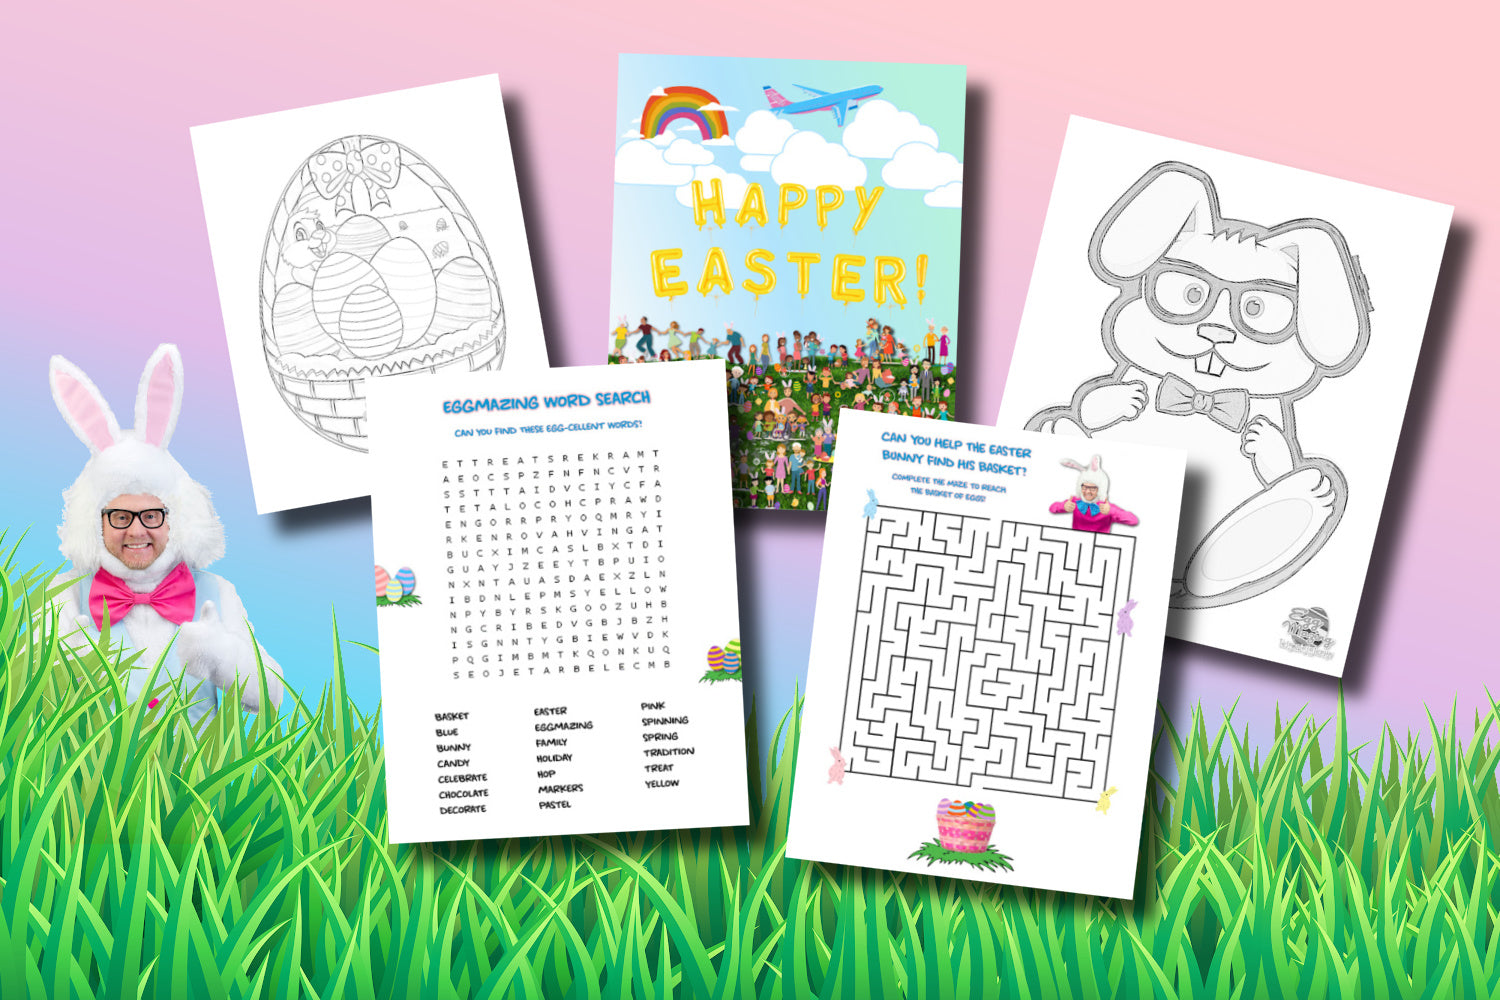 Collage of images including a man dressed in a bunny suit, a word search, a maze, an illustration of a bunny and an Easter basket, and a picture page showing a group of people at an Easter egg hunt. 